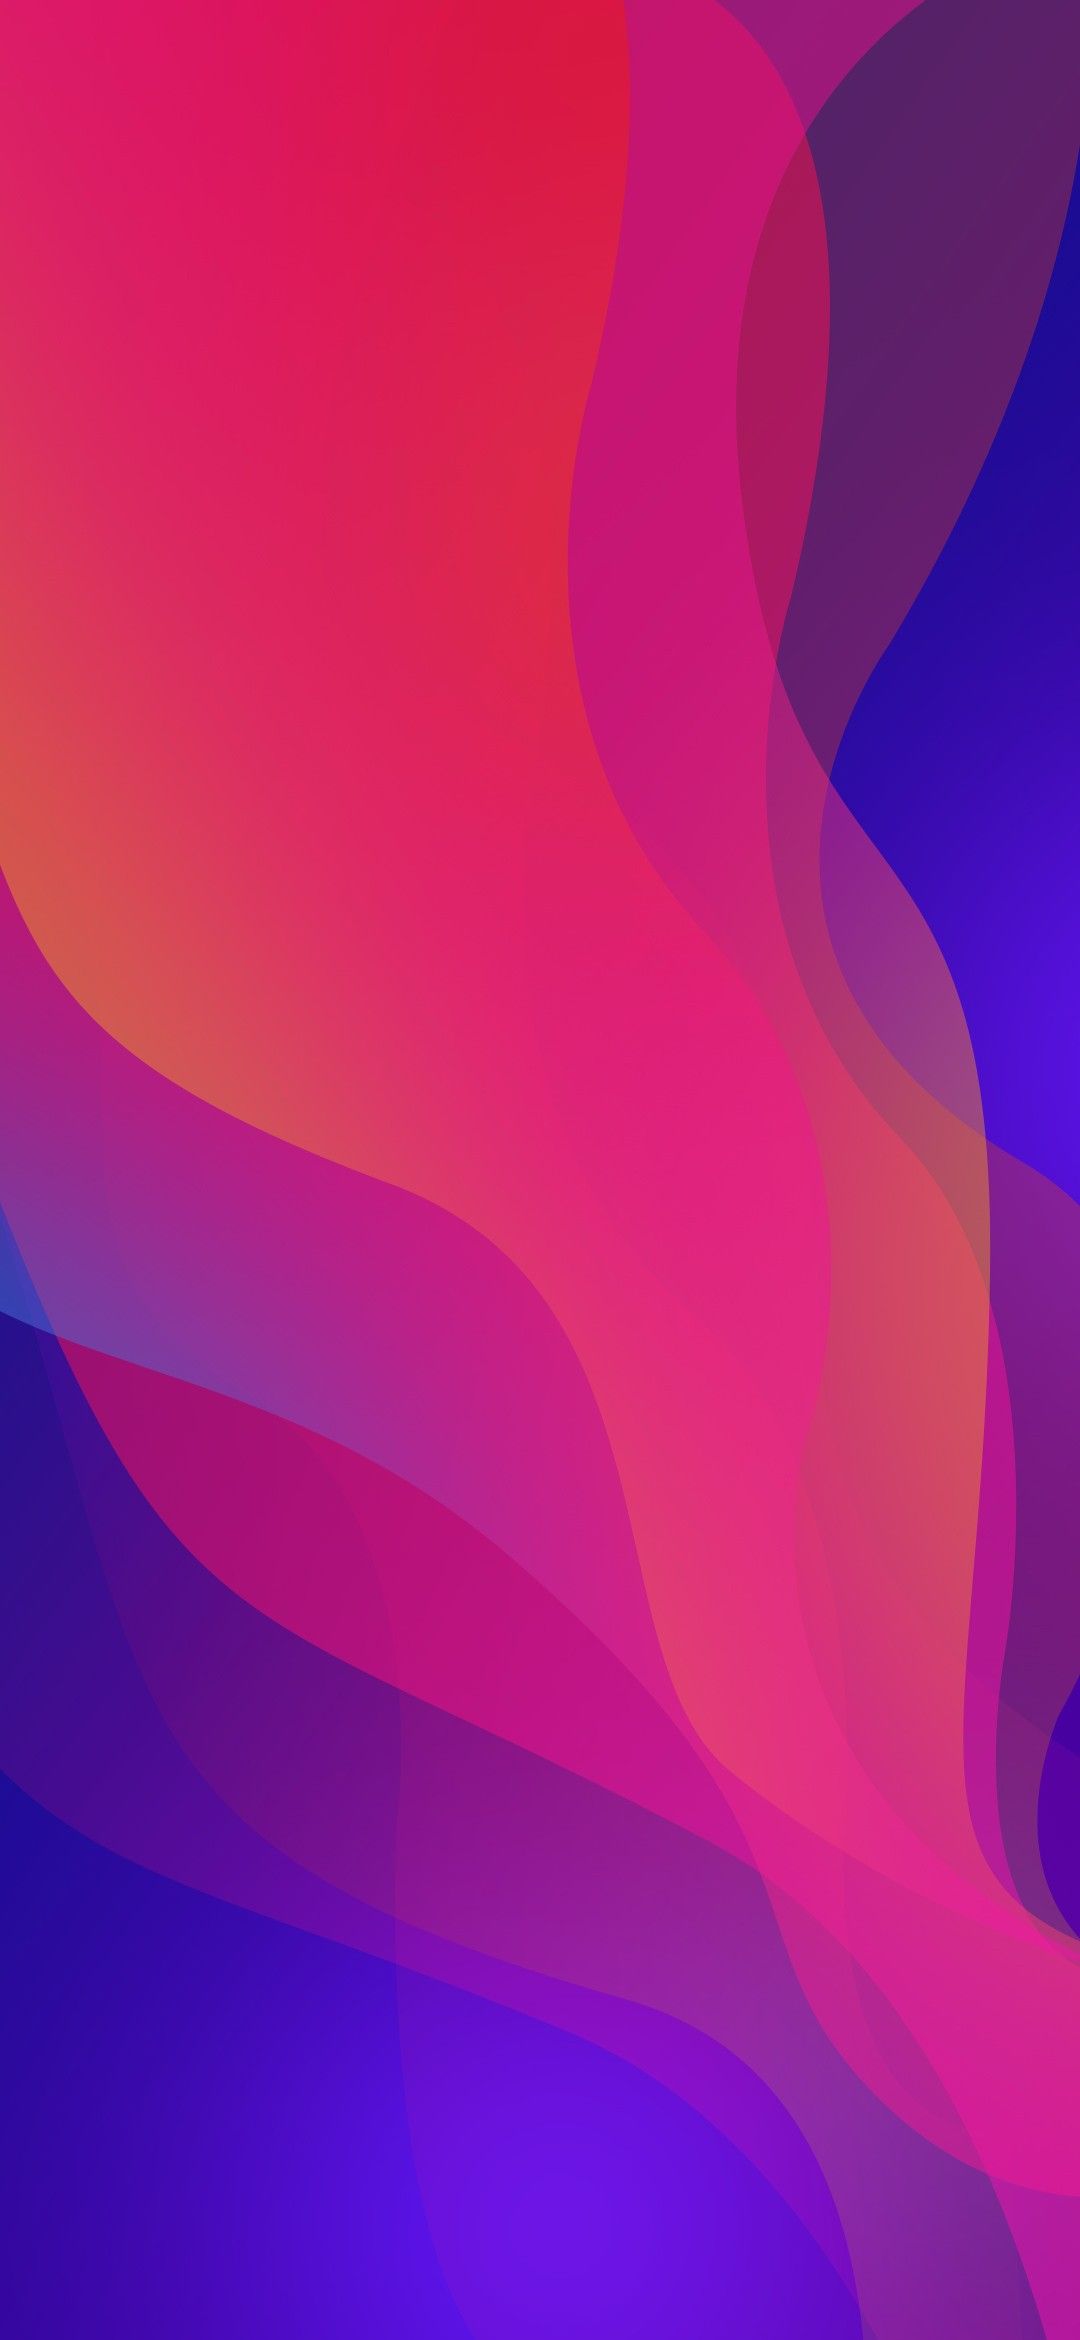 Oppo Find X Abstract Amoled Liquid Gradient Wallpaper